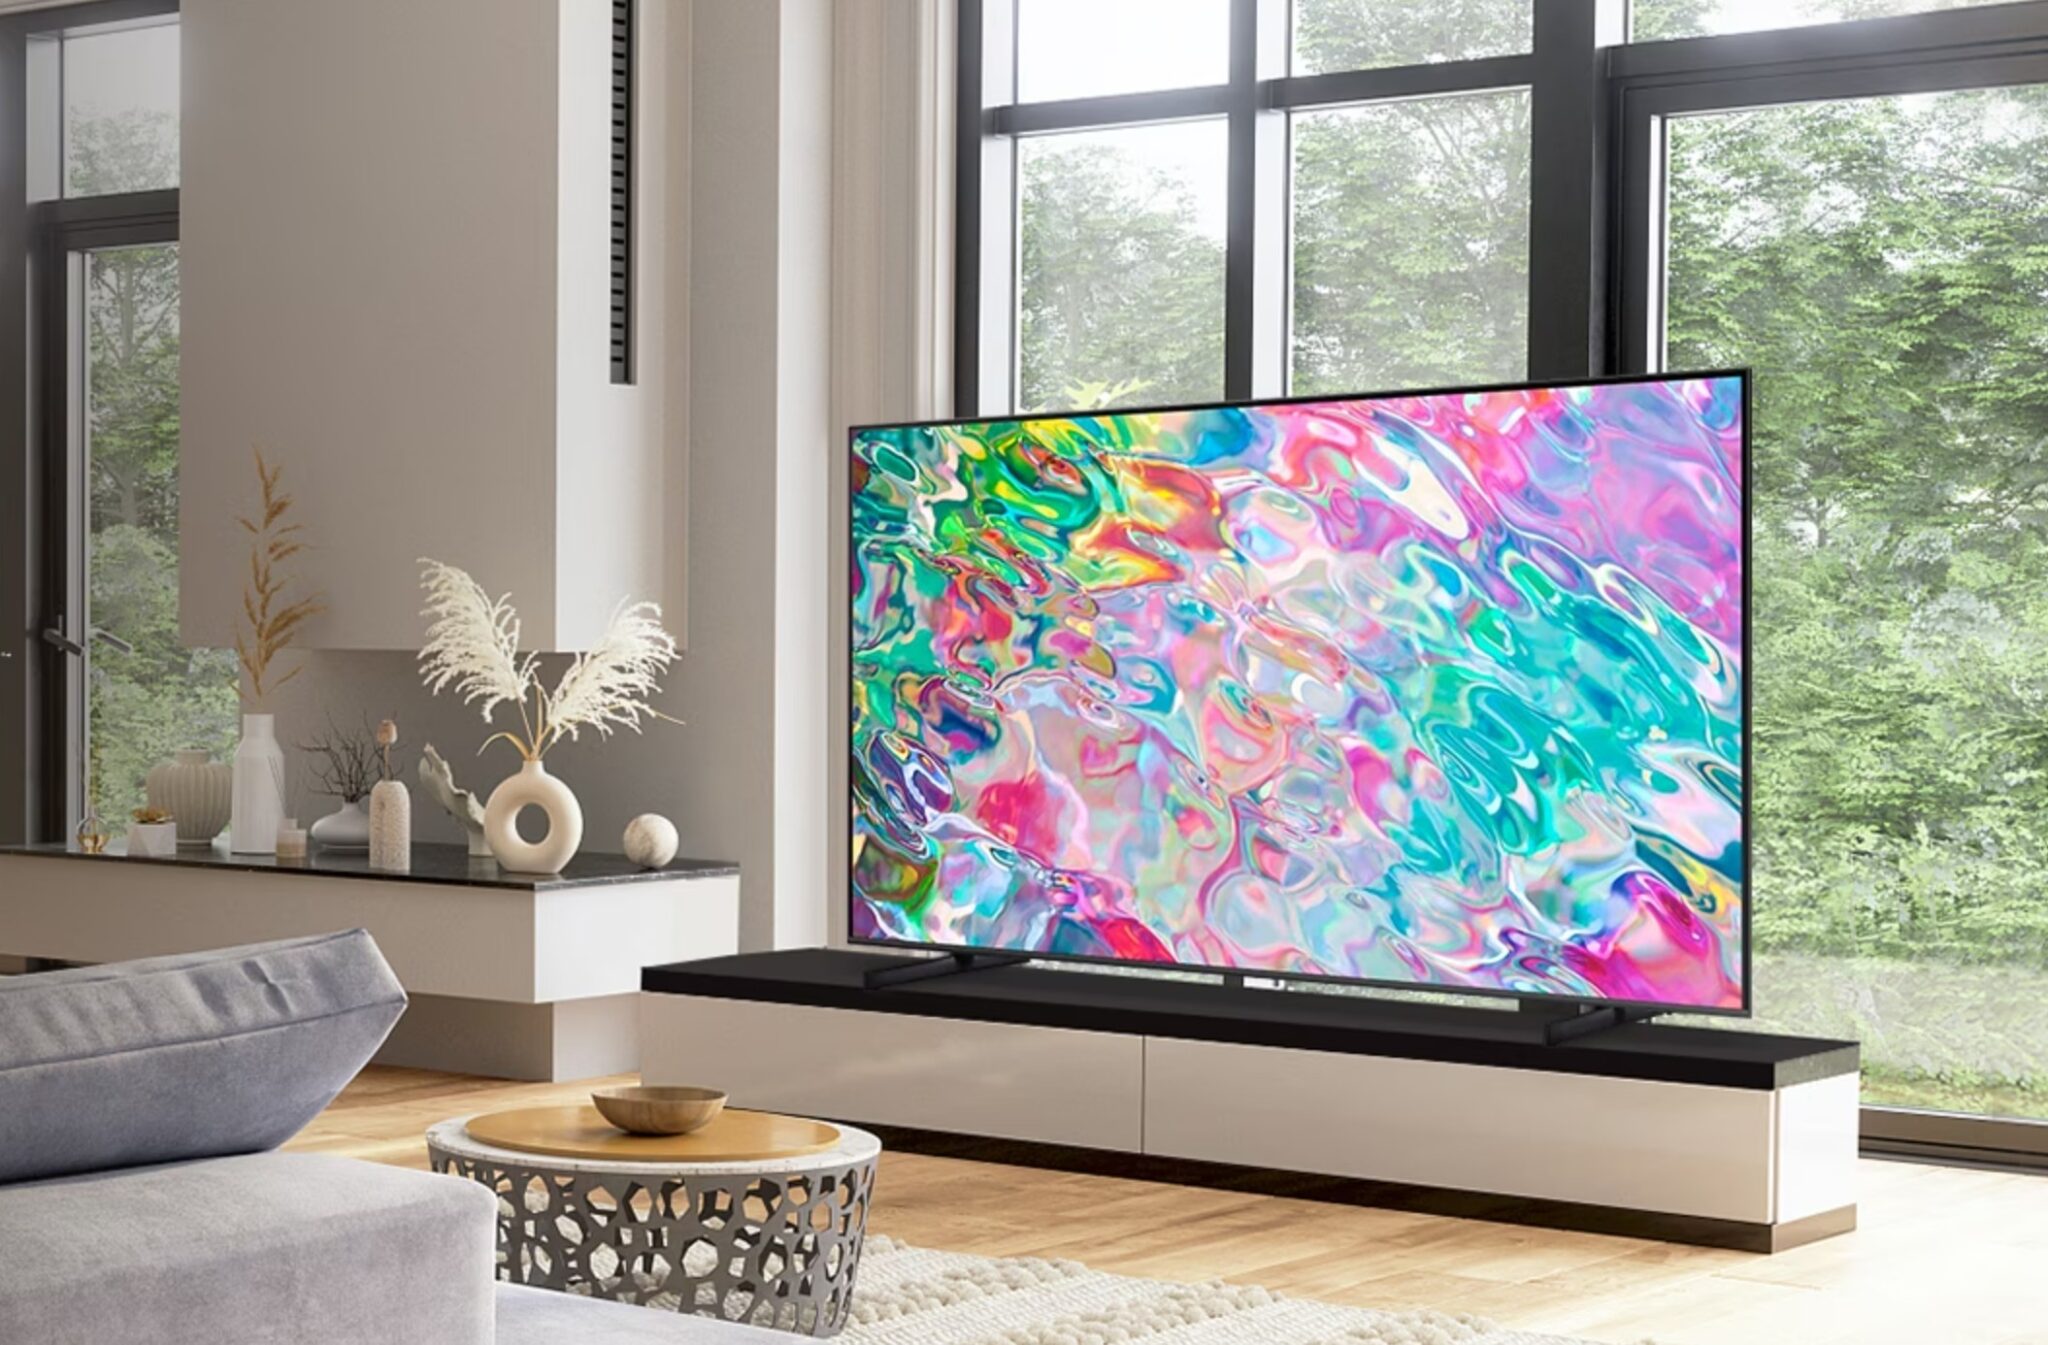 Samsung Q70C Review: QLED TV that combines good looks with great ...